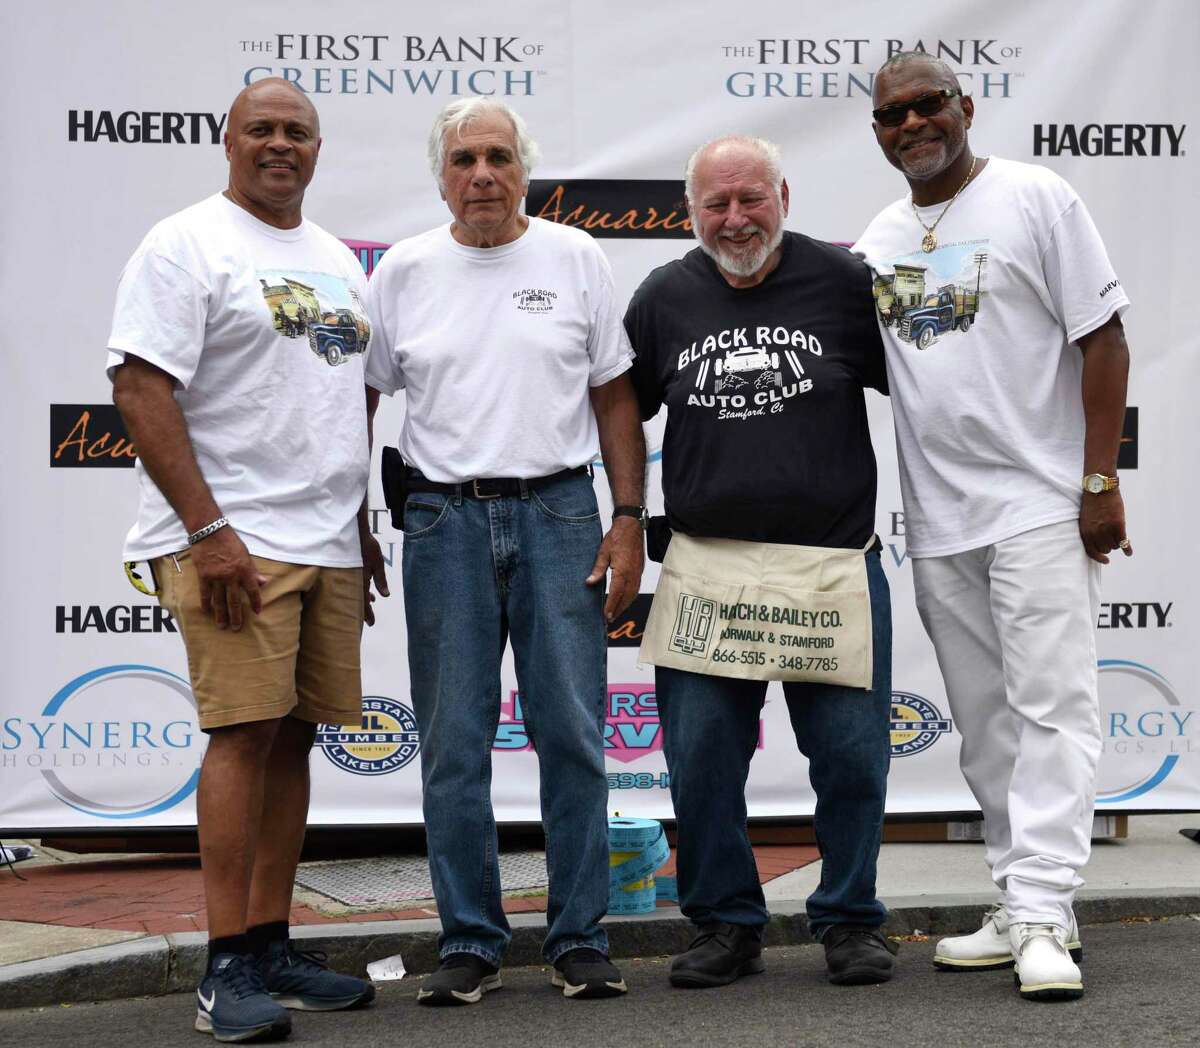 Event organizers, from left, Guy Fortt, Butch Macchio, Gene Rizzo and Russell Davis pose at the Cruising Stamford auto show at Columbus Park in Stamford, Conn.  Sunday, August 21, 2022. More than 150 vintage to early 80's cars are on display on Main Street, with live music, outdoor dining, face painting, prizes and more.  The event, now in its second year, was presented by First Bank of Greenwich, Synergy1Holdings and BlackRoads Auto Club to honor Eversource Energy and the US Postal Service.